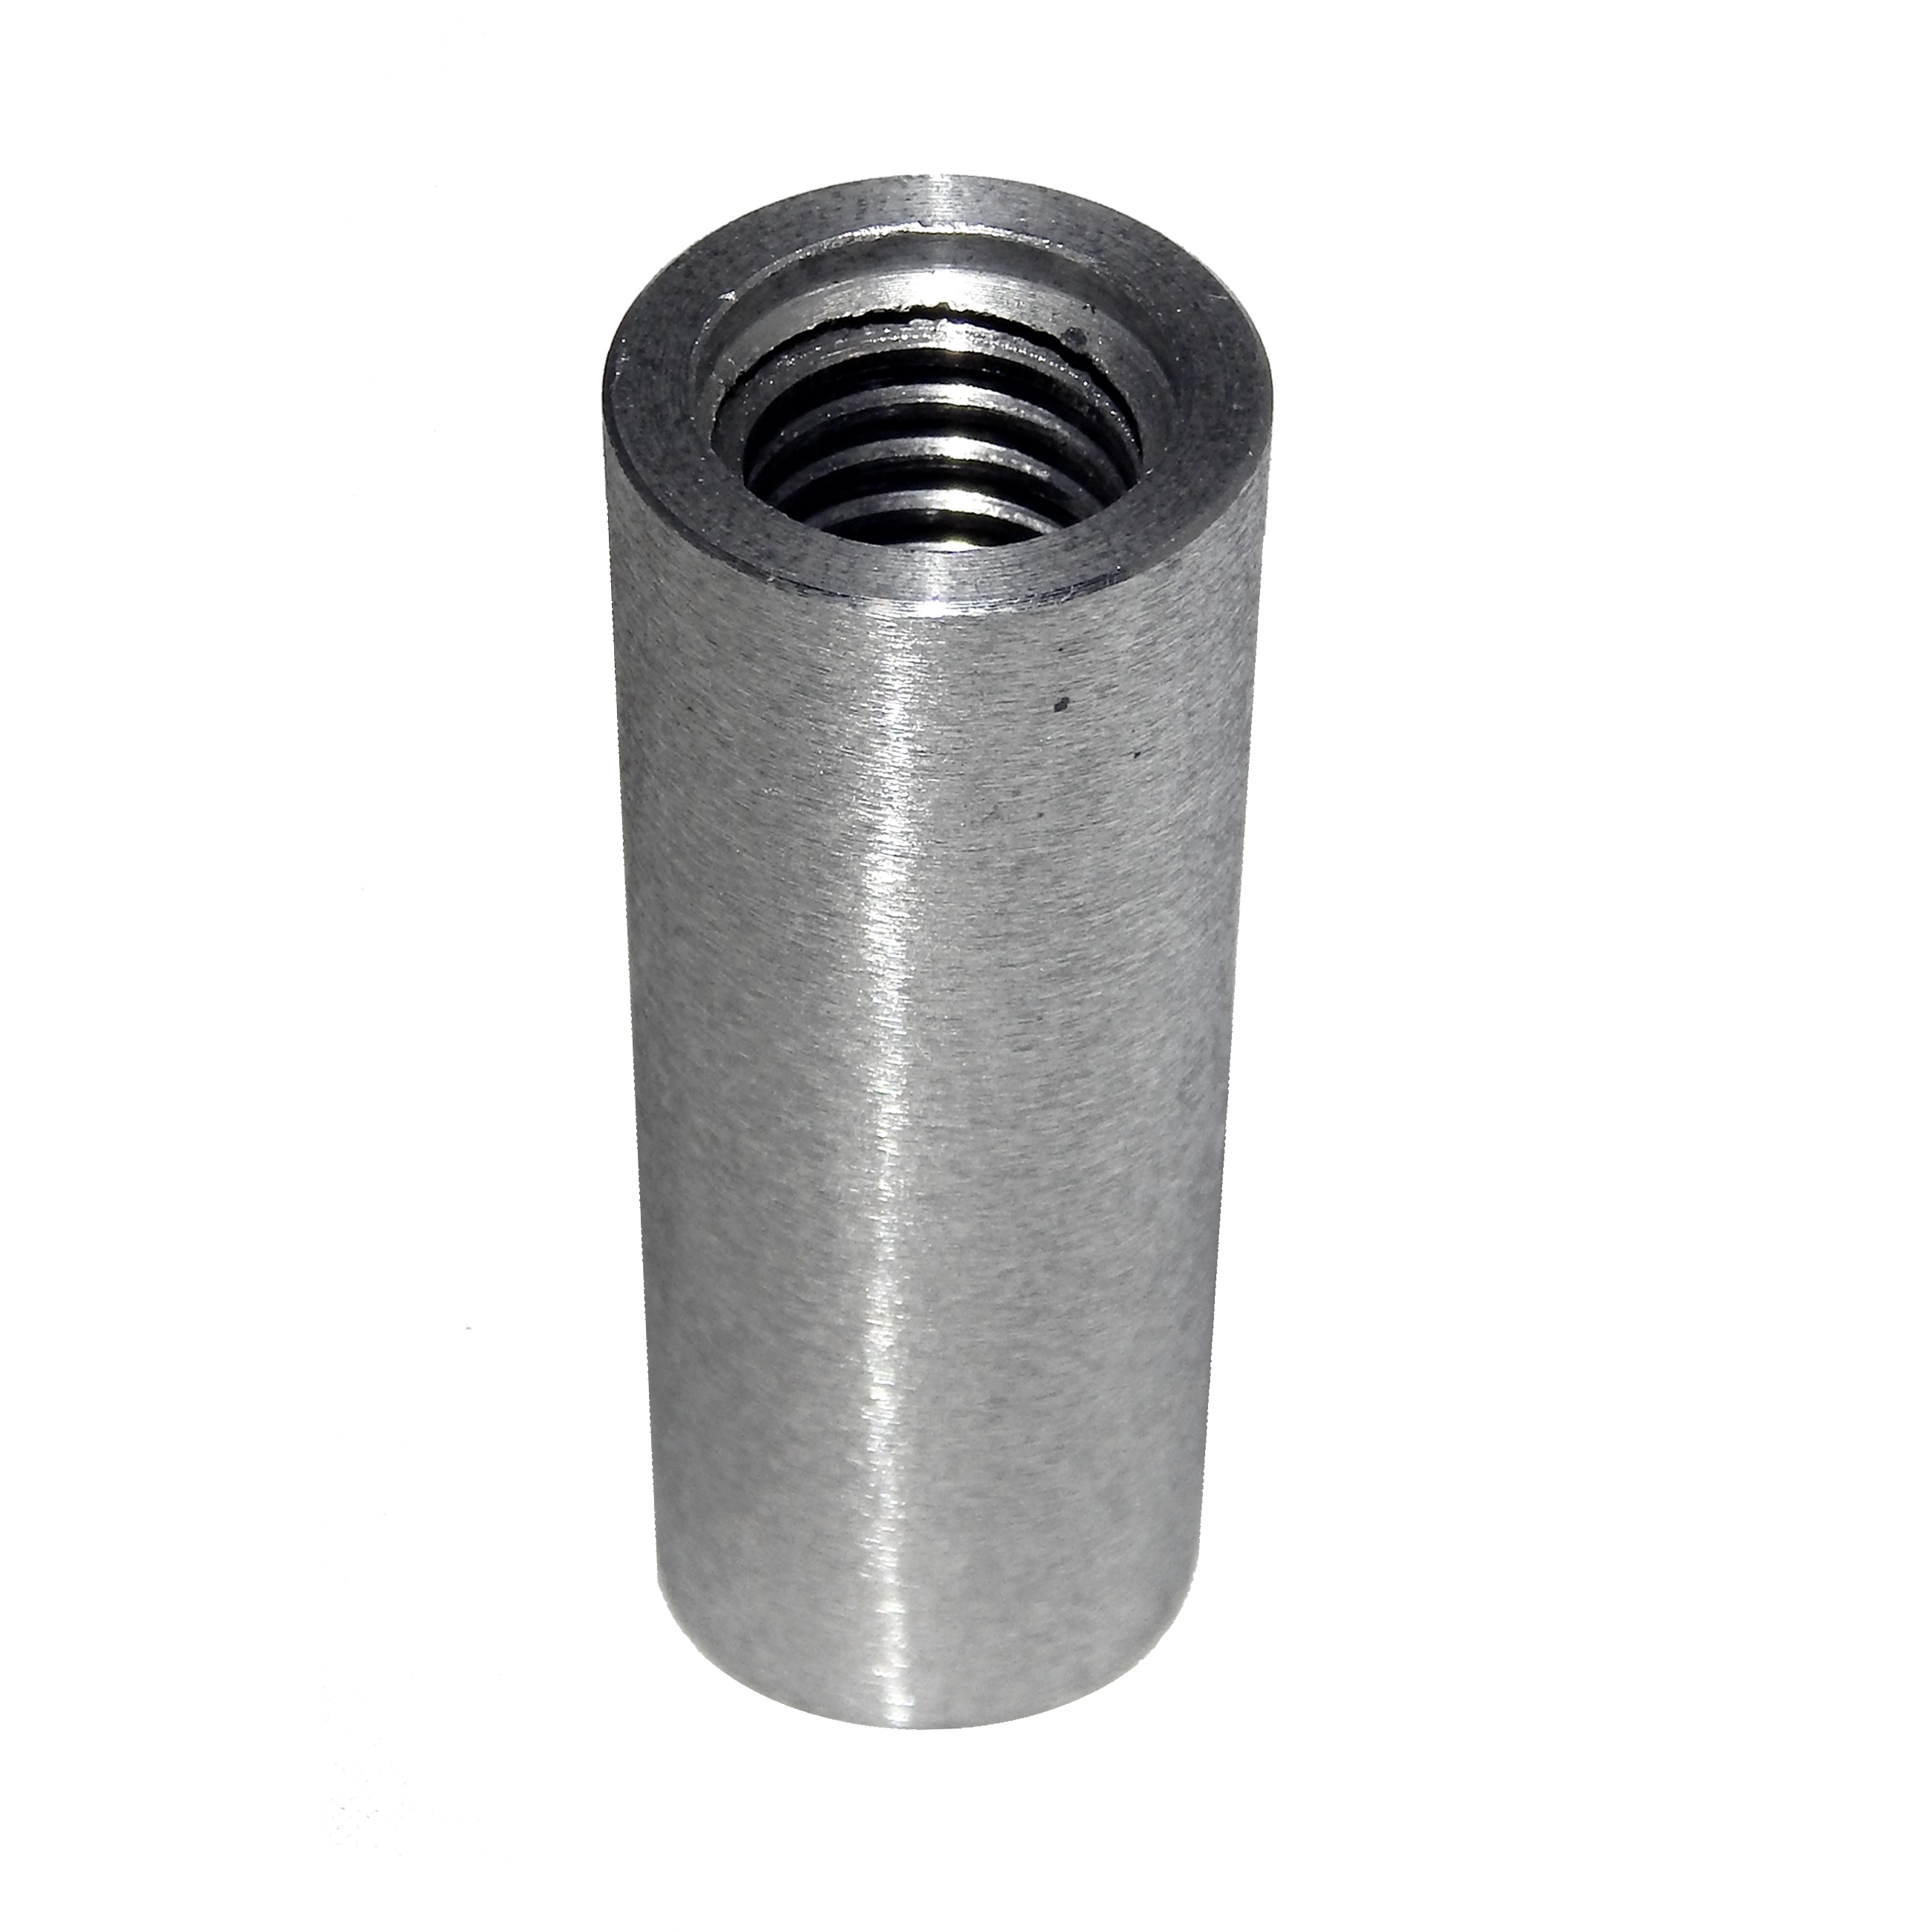 Lee Engineering Aluminum Tapered Adapter for 3/4” Rod Socket